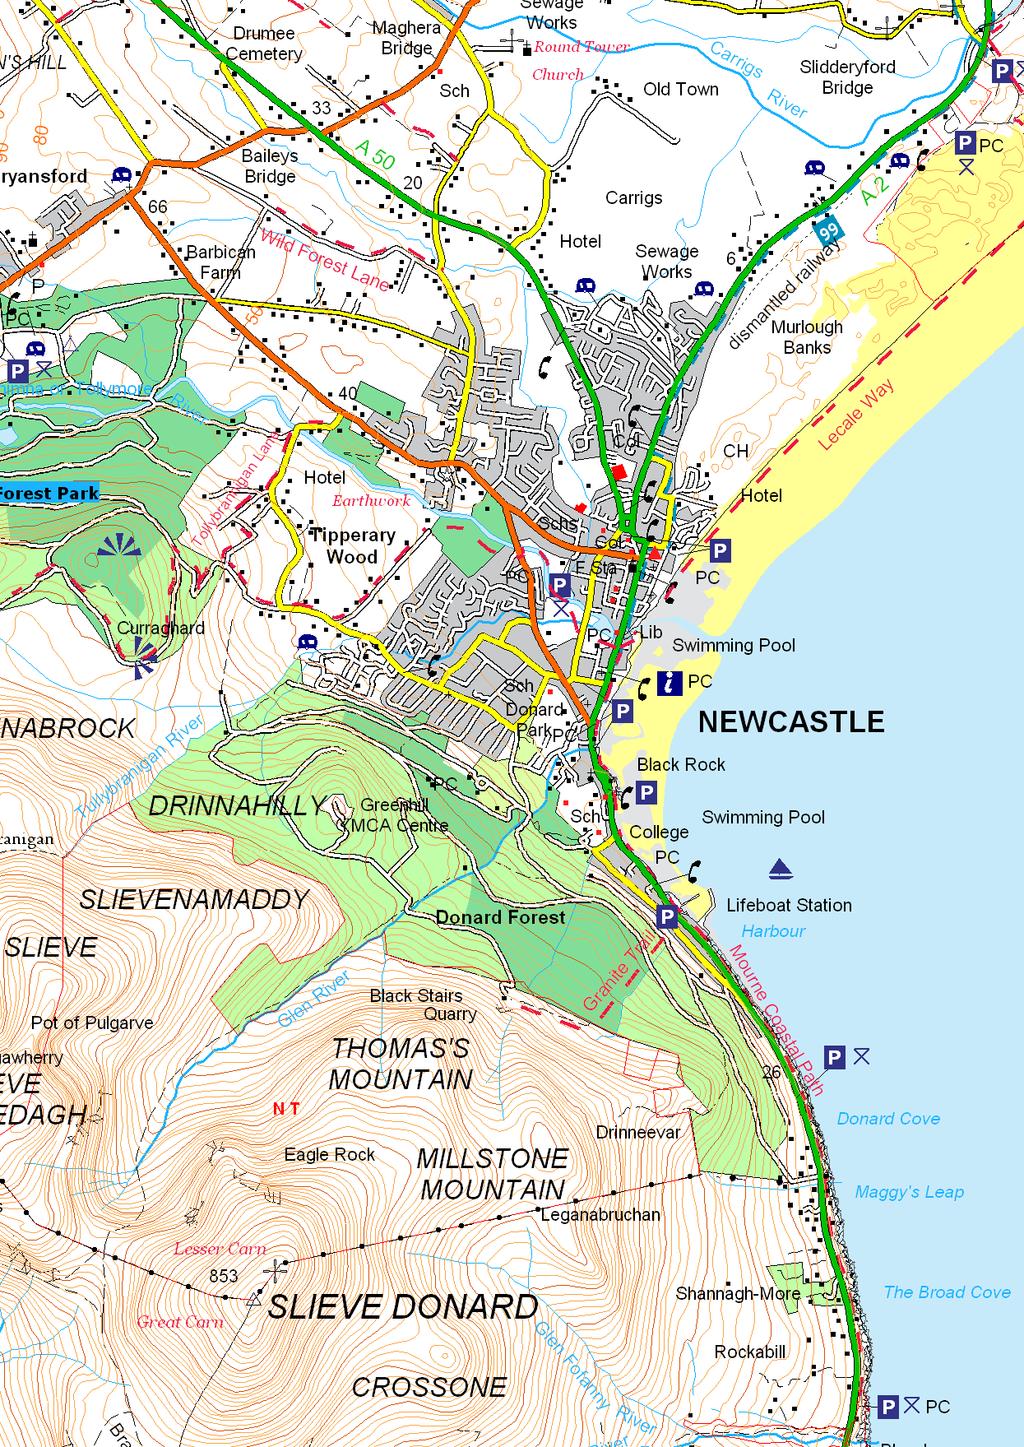 Newcastle N E 0 cale 4cm : 1km 1km 2km Newcastle is set in a stunning location on the Irish ea and at the base of lieve Donard, the highest of the Mourne Mountains peaks.